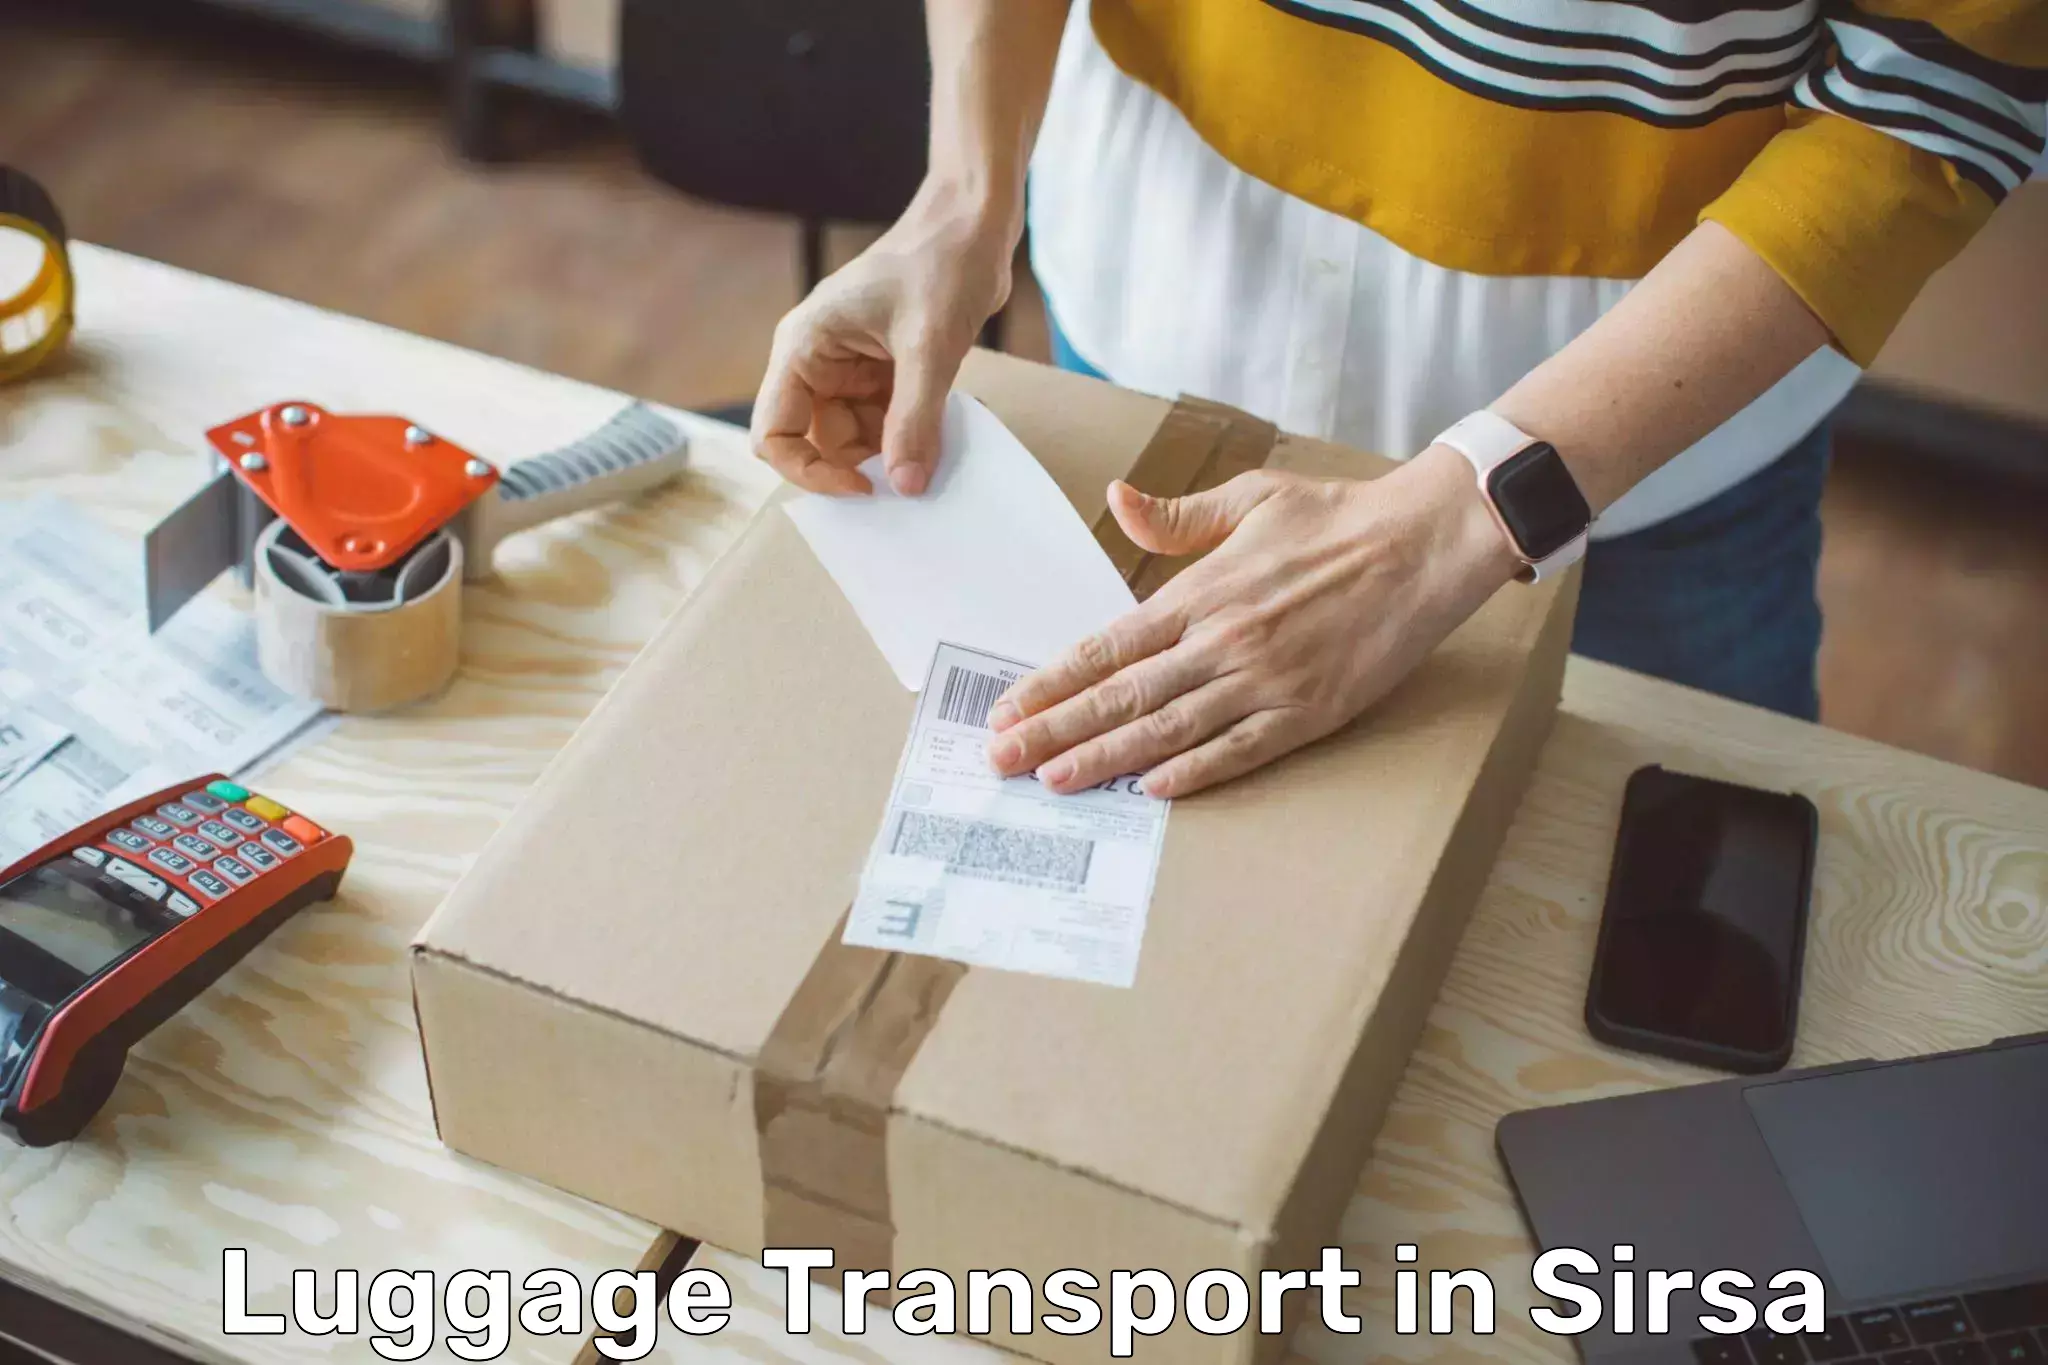 Baggage transport cost in Sirsa